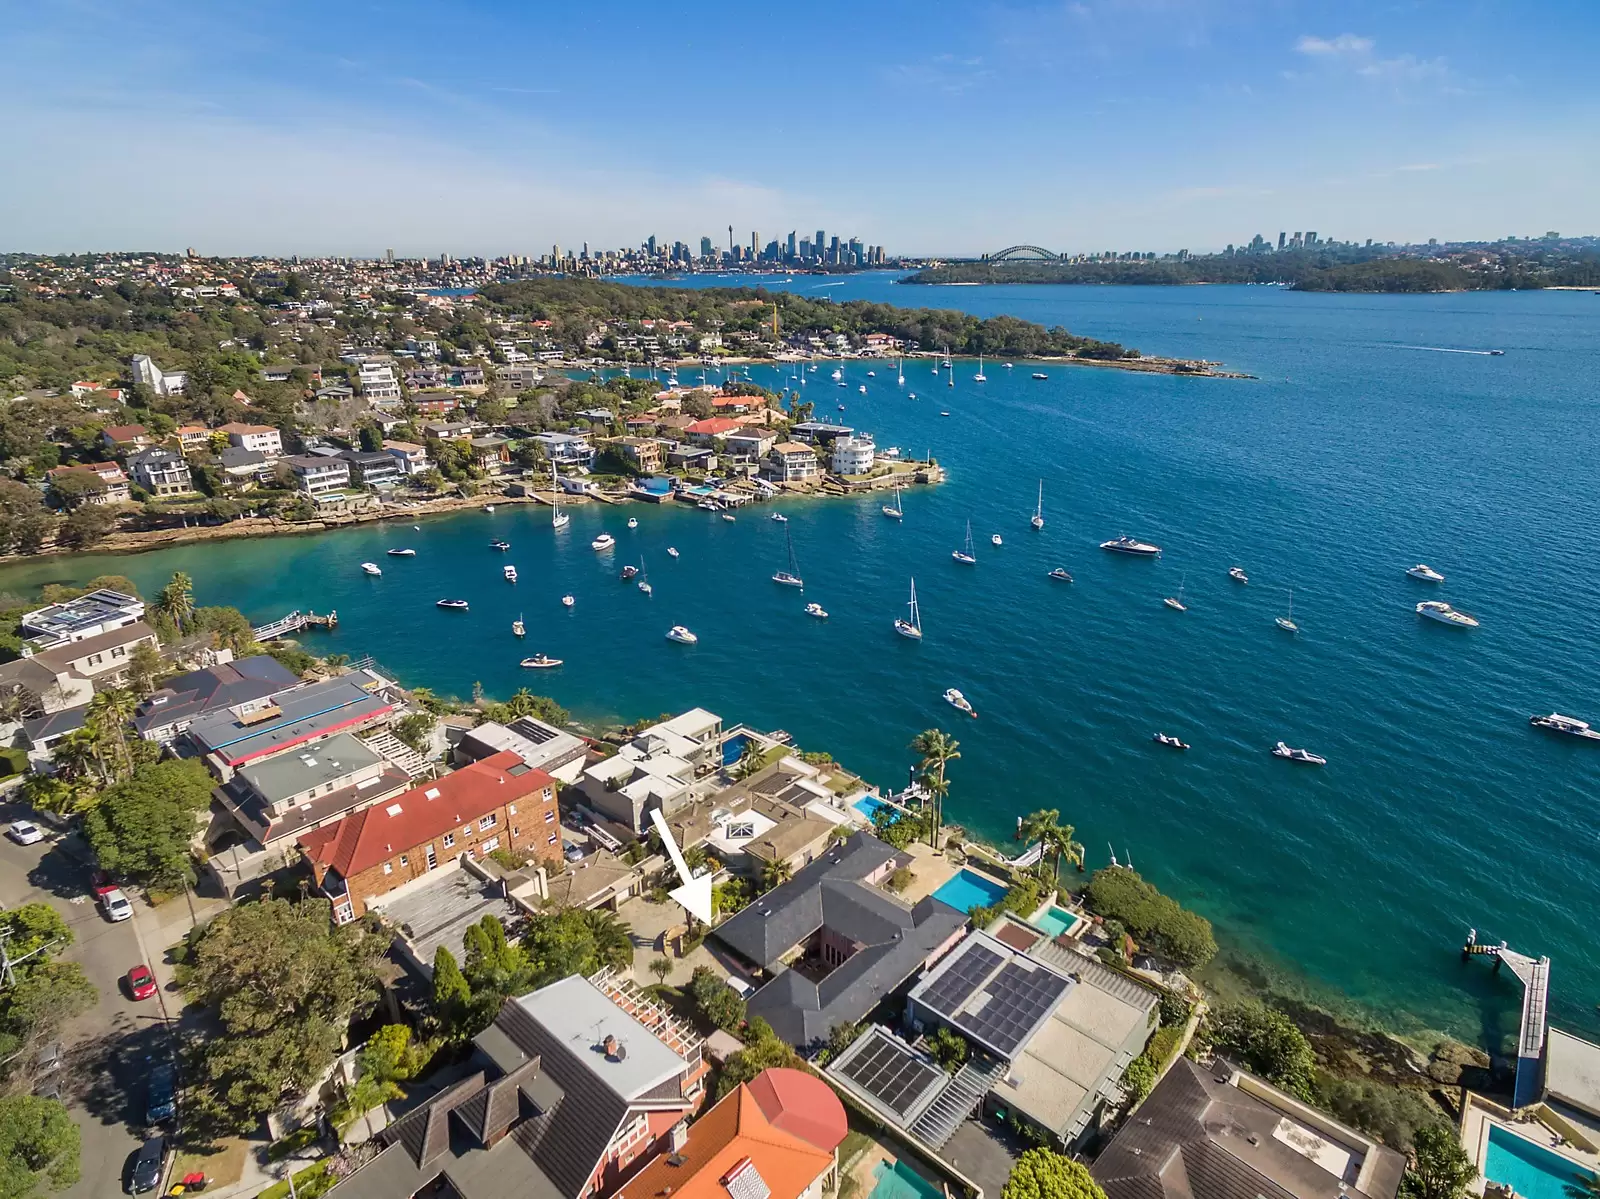 Photo #14: 34 The Crescent, Vaucluse - Sold by Sydney Sotheby's International Realty